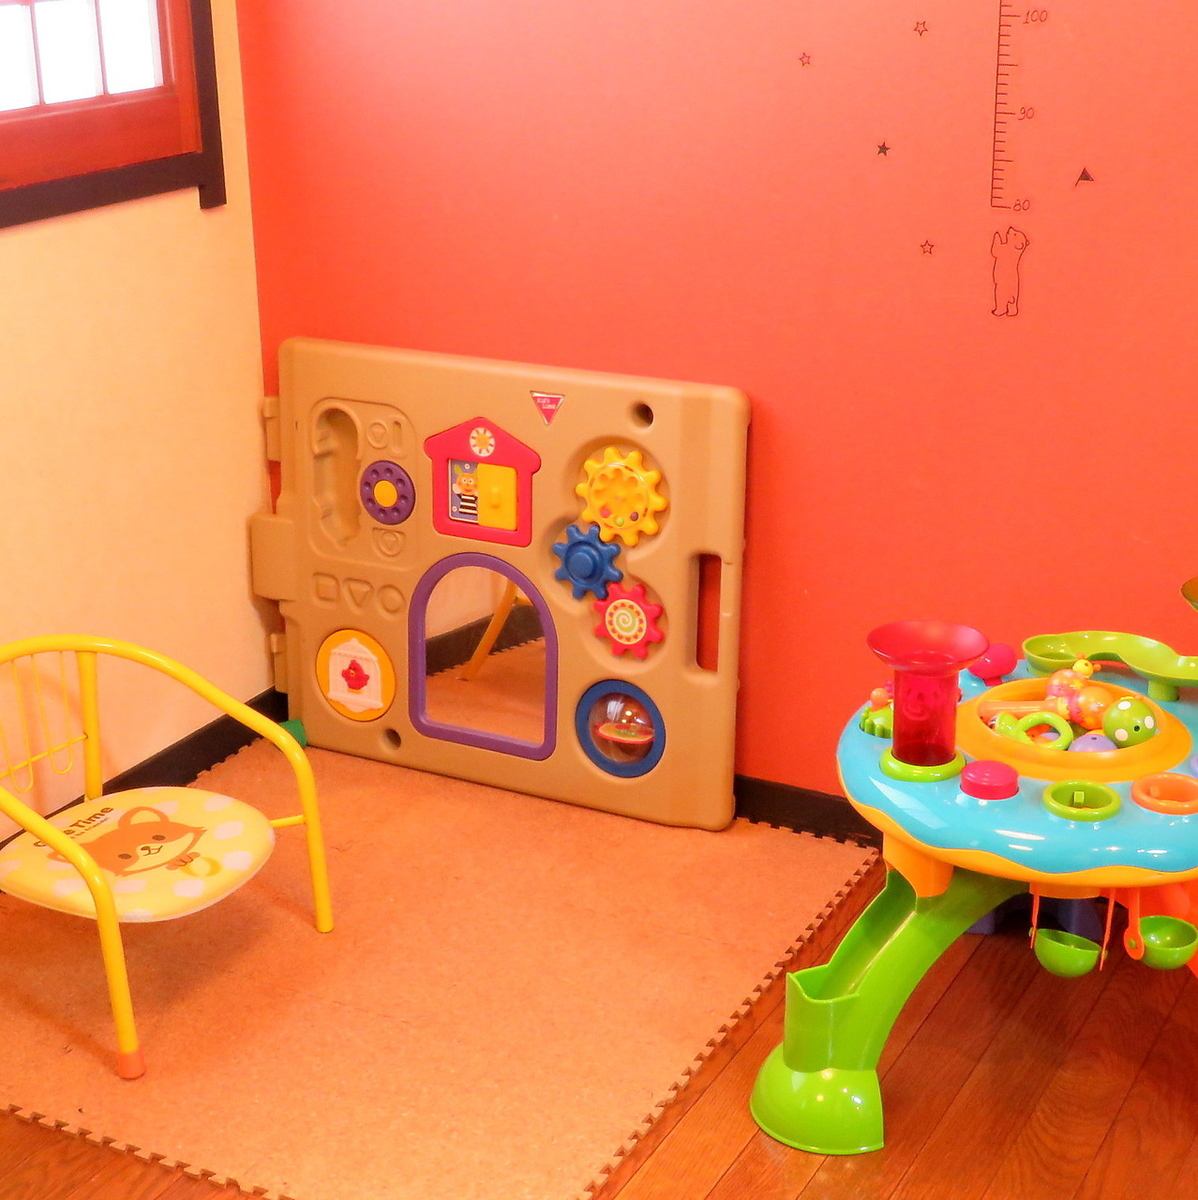 Parking lot and kids space are also available ◎ Great for families ♪